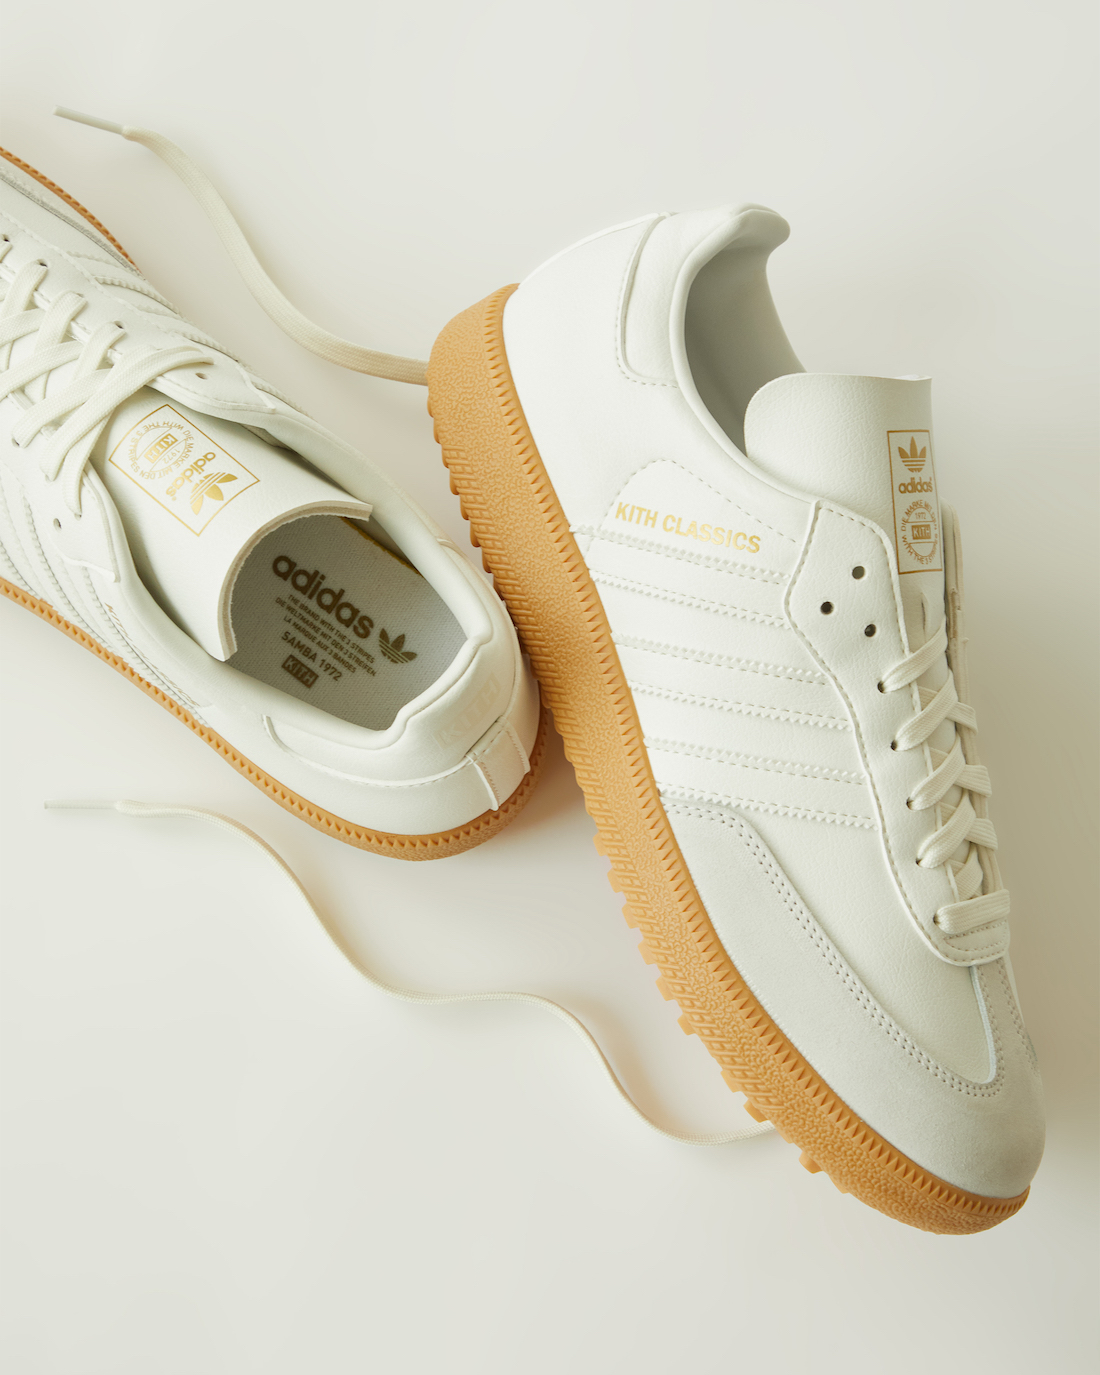 Adidas Samba Golf: What are the 4 new colors?